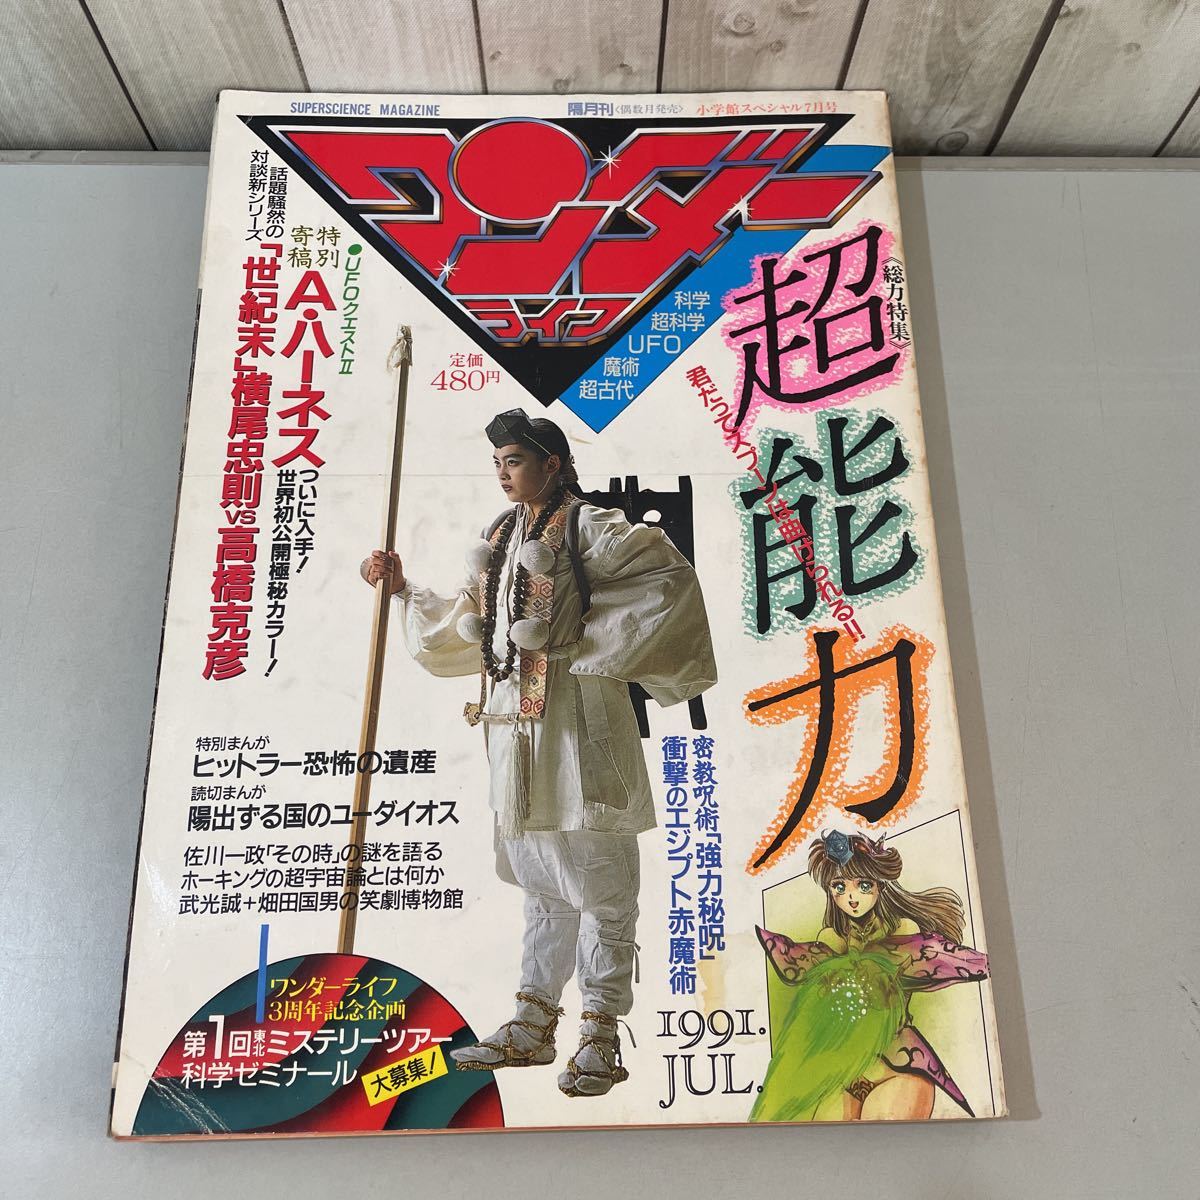 * rare * super science magazine wonder life no. 18 number Shogakukan Inc. special 1991 year 7 month number / super ability / impact UFO information / hit la-/..*2748